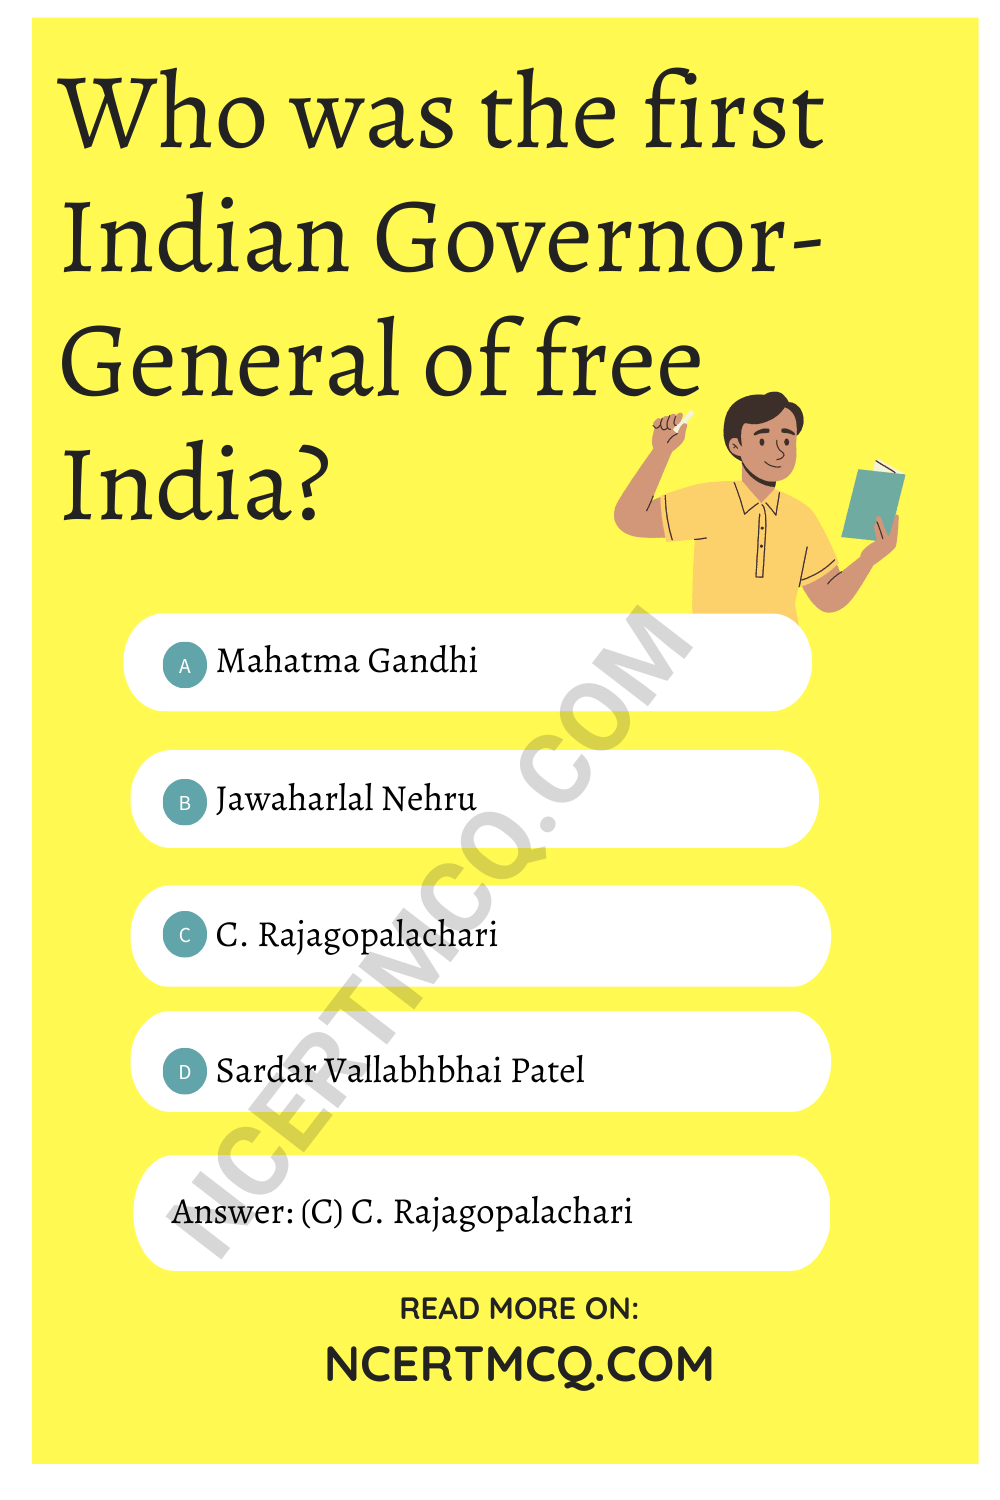 Who was the first Indian Governor-General of free India?